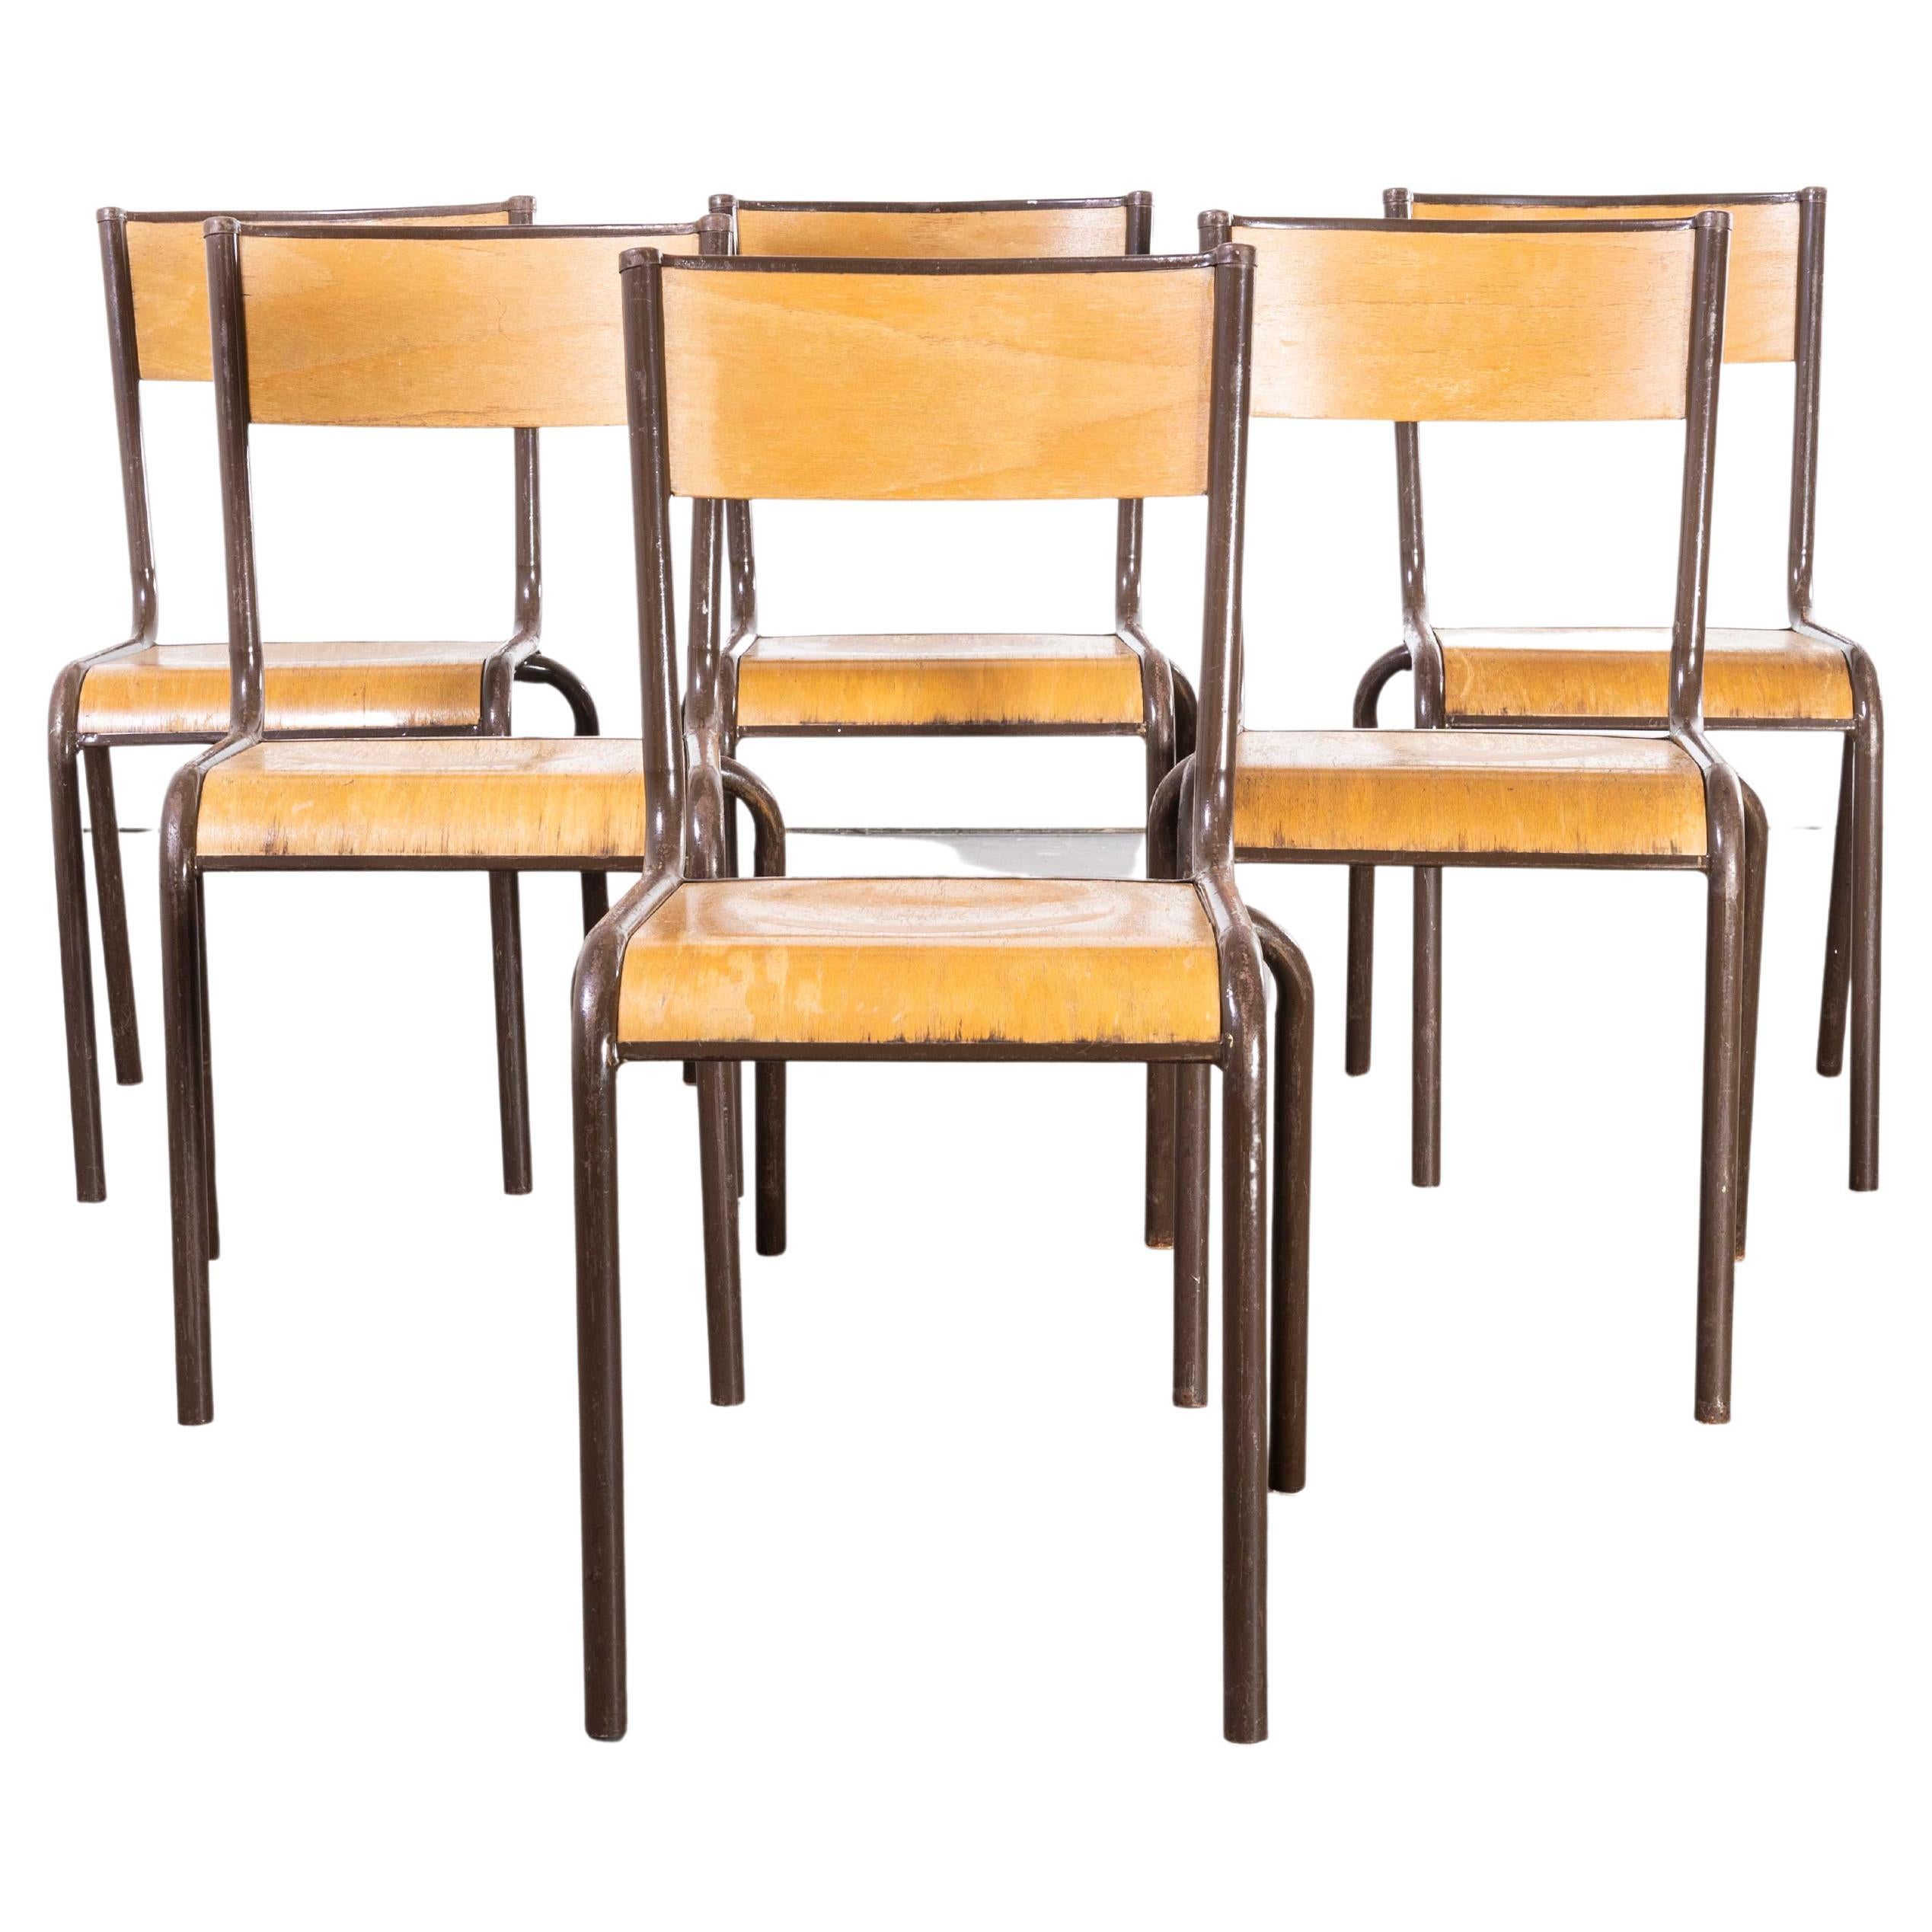 1950's French Mullca Dining Chairs Model 510, Chocolate, Set of Six